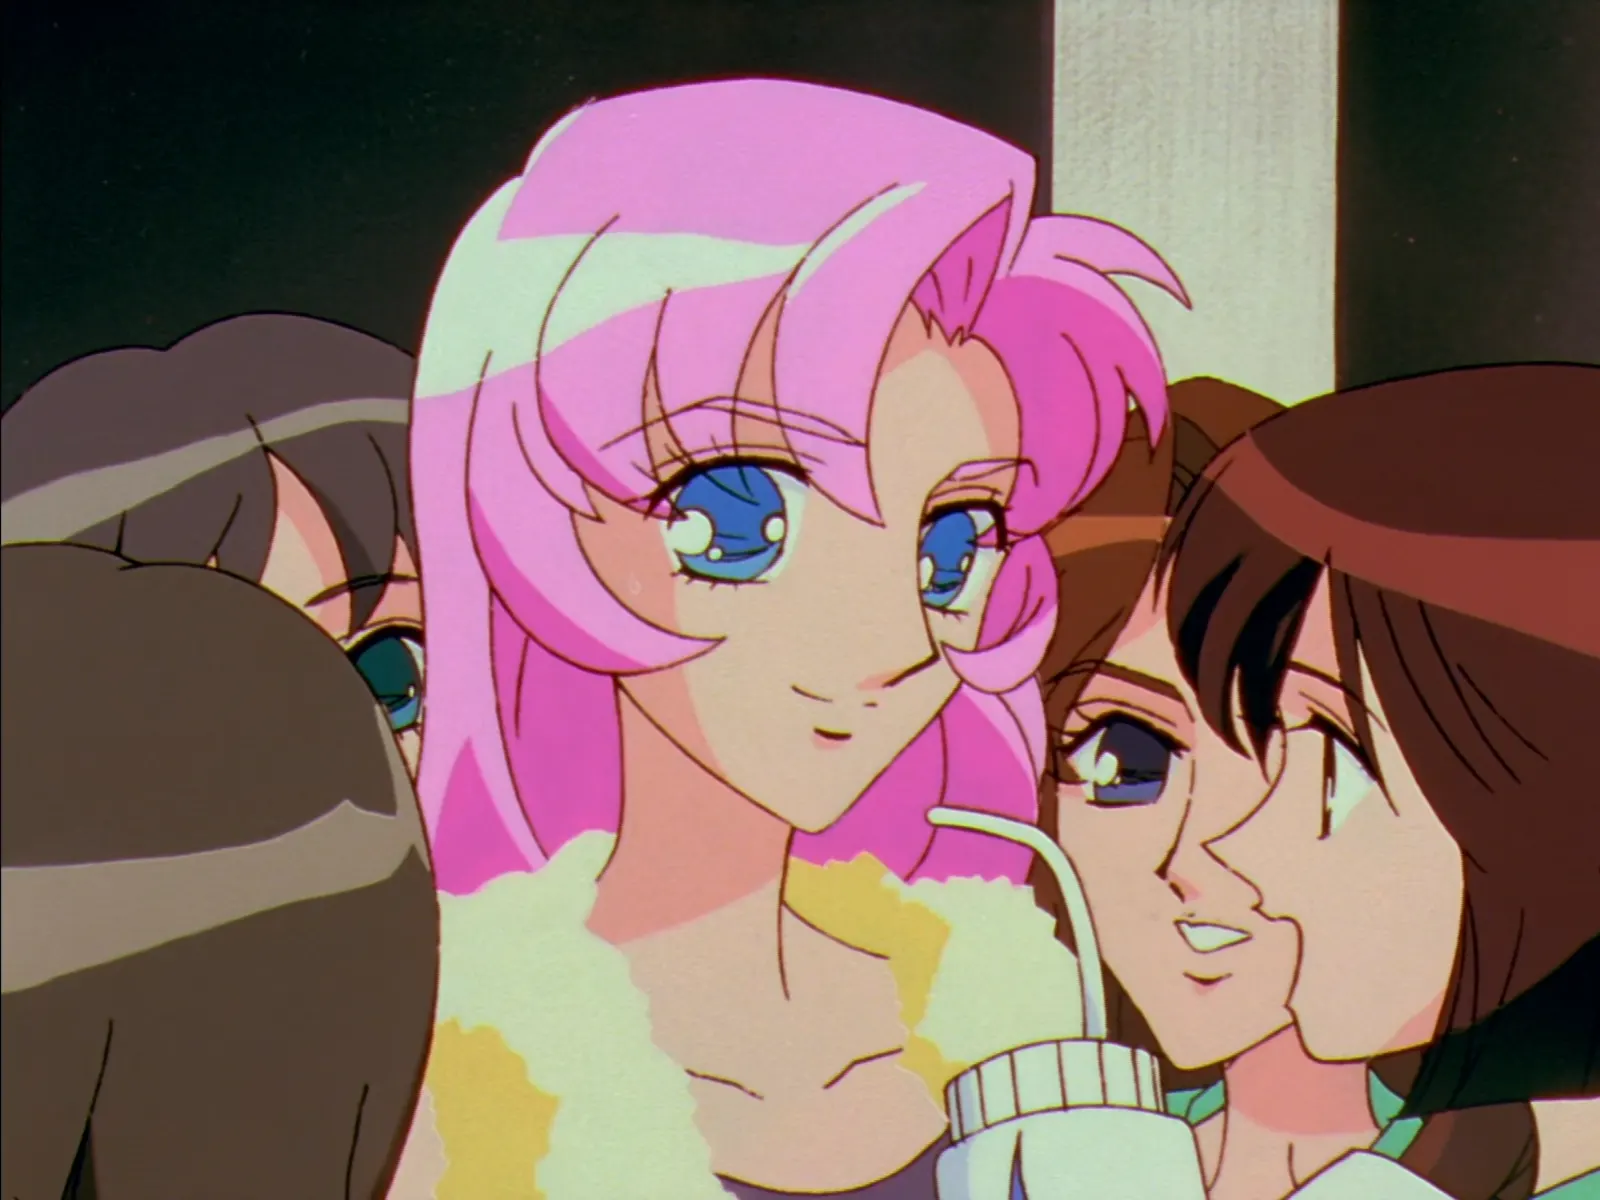 Utena surrounded by squealing fangirls.